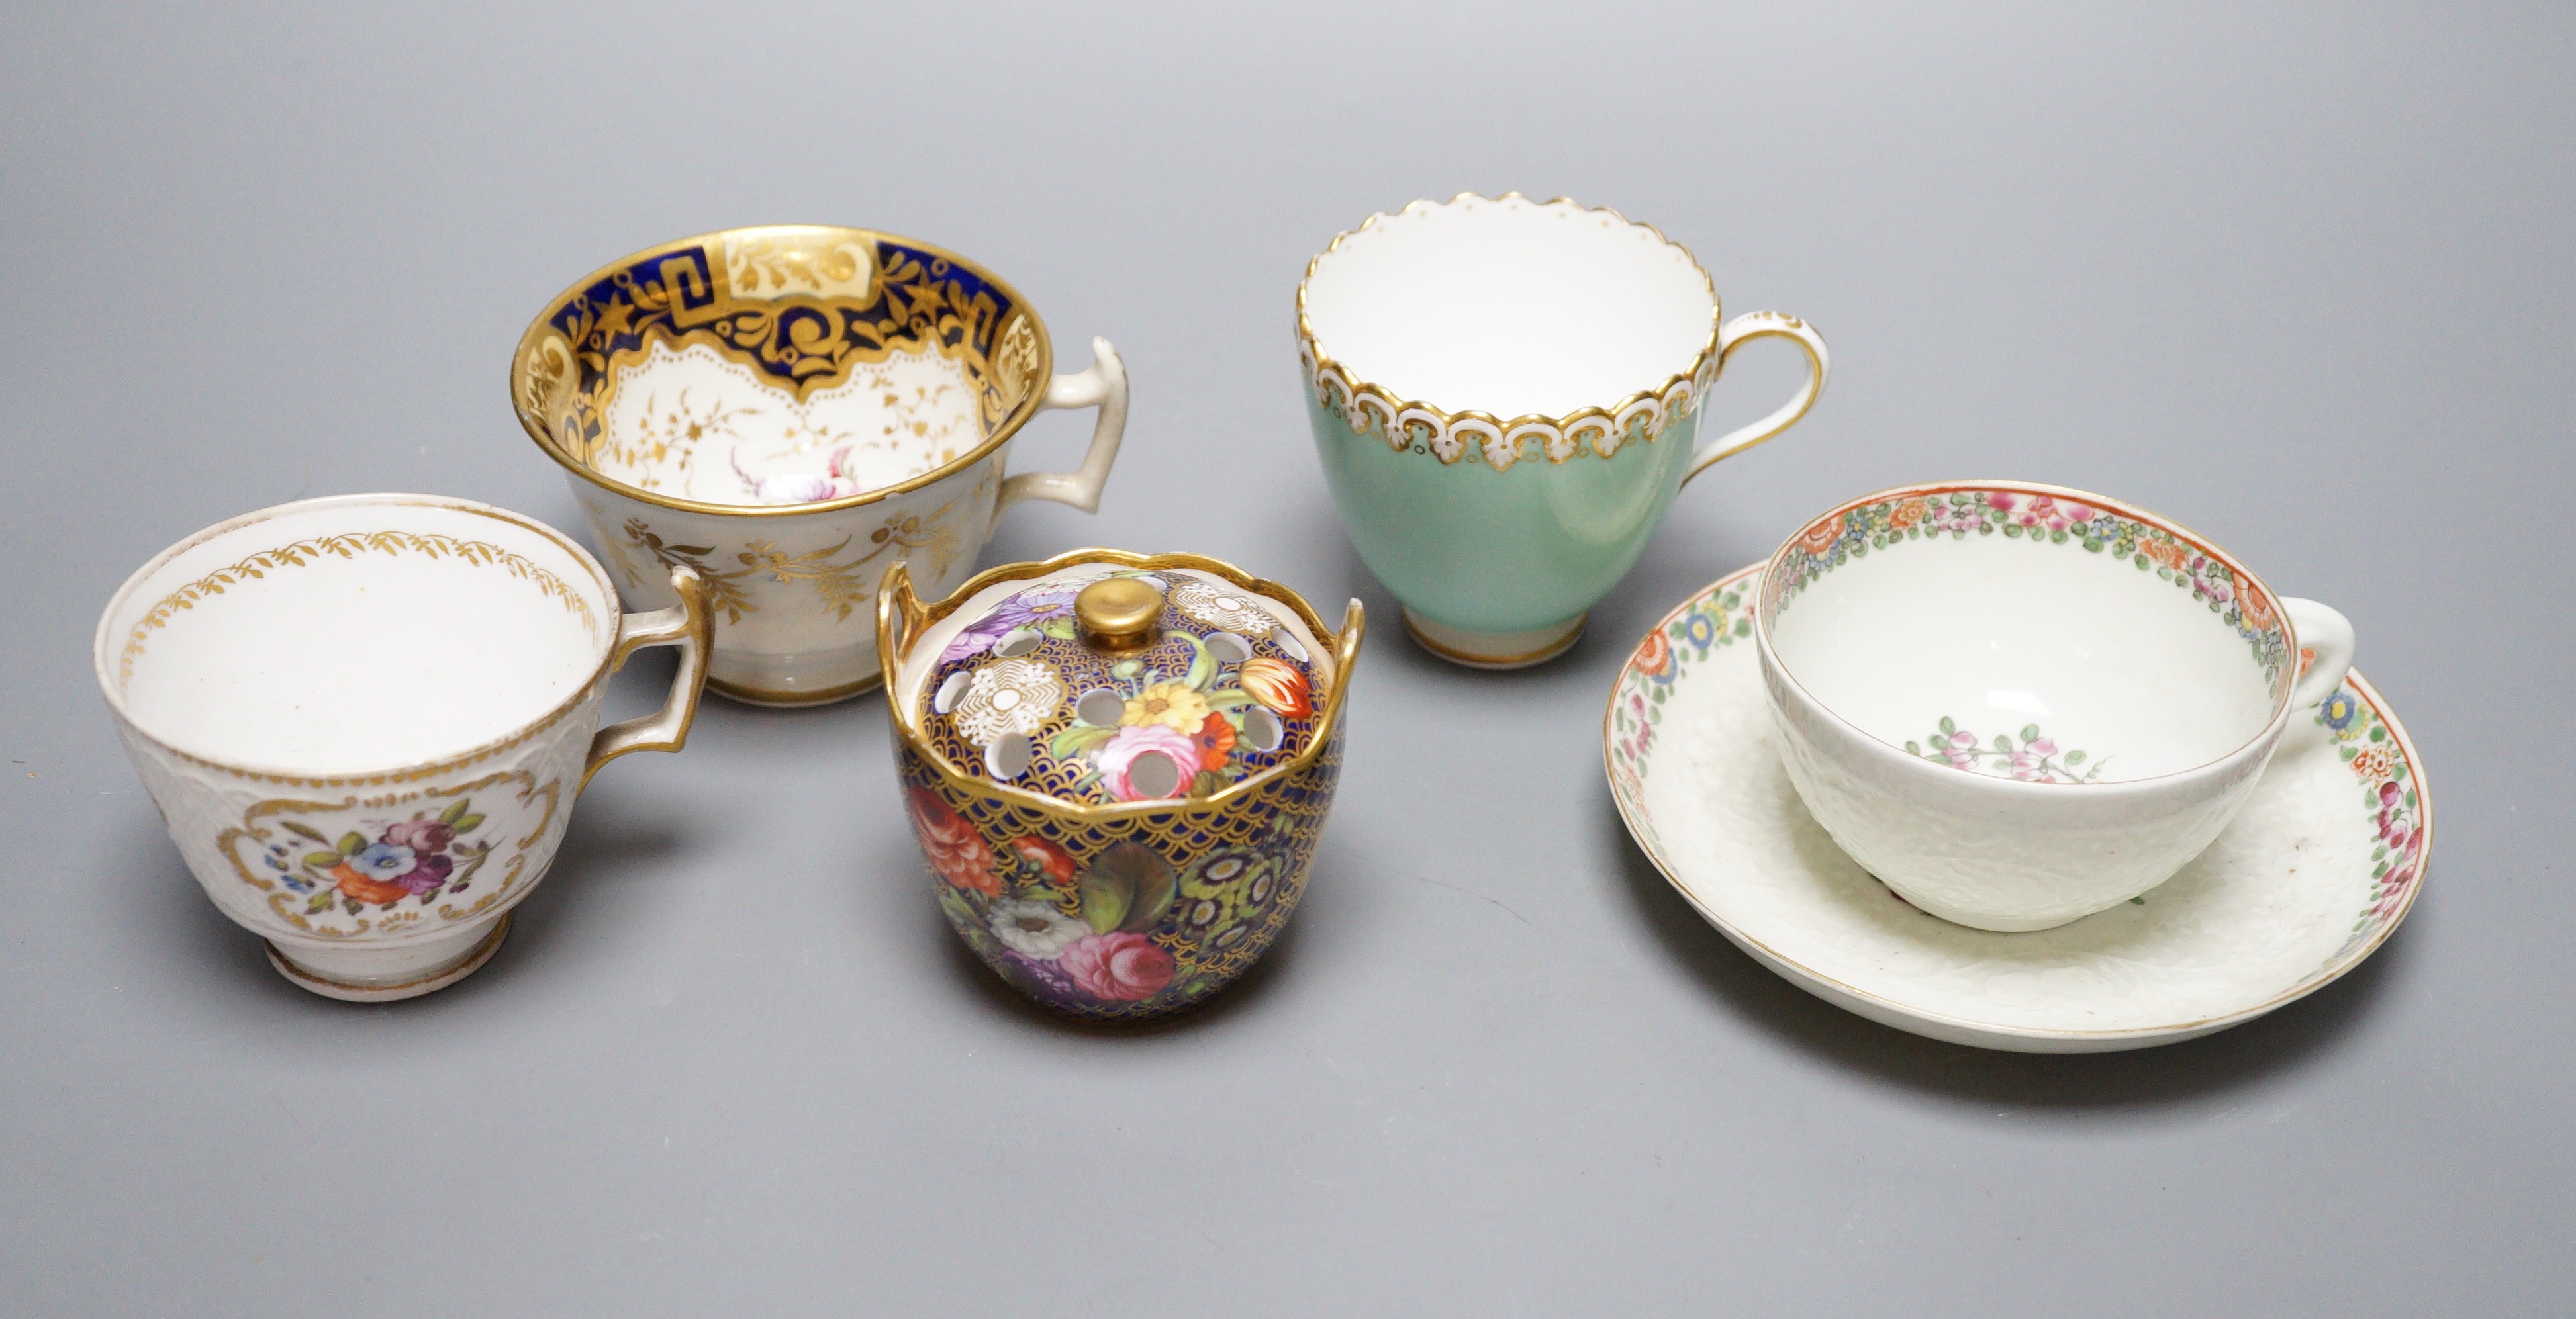 A small bone china pot pourri, possibly Spode, a relief moulded teacup and saucer, and three cups